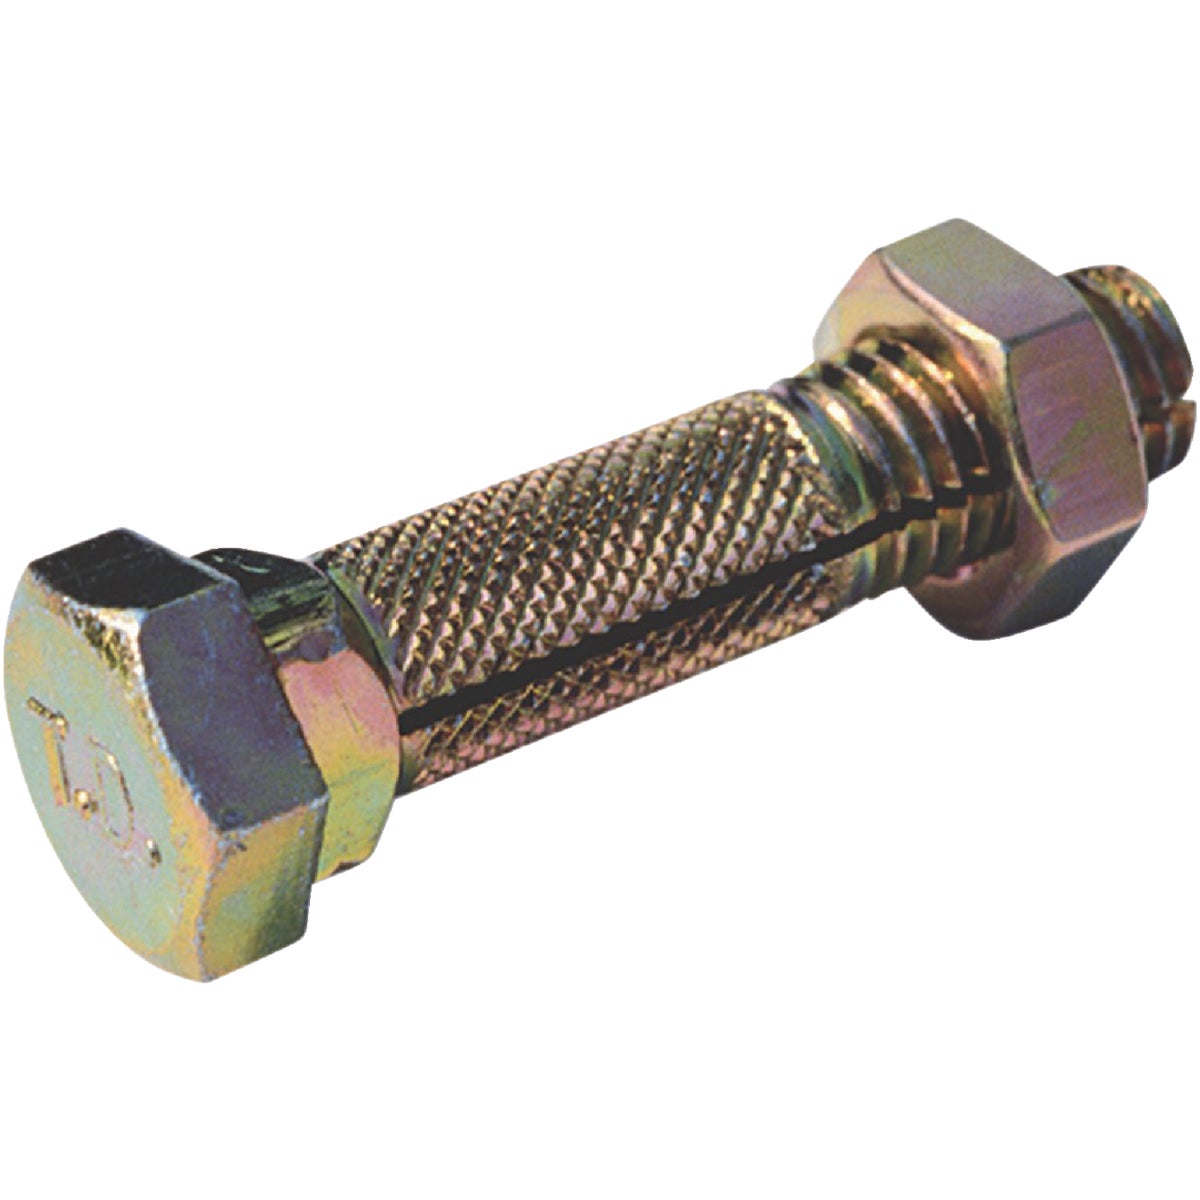 Slotted Bolt